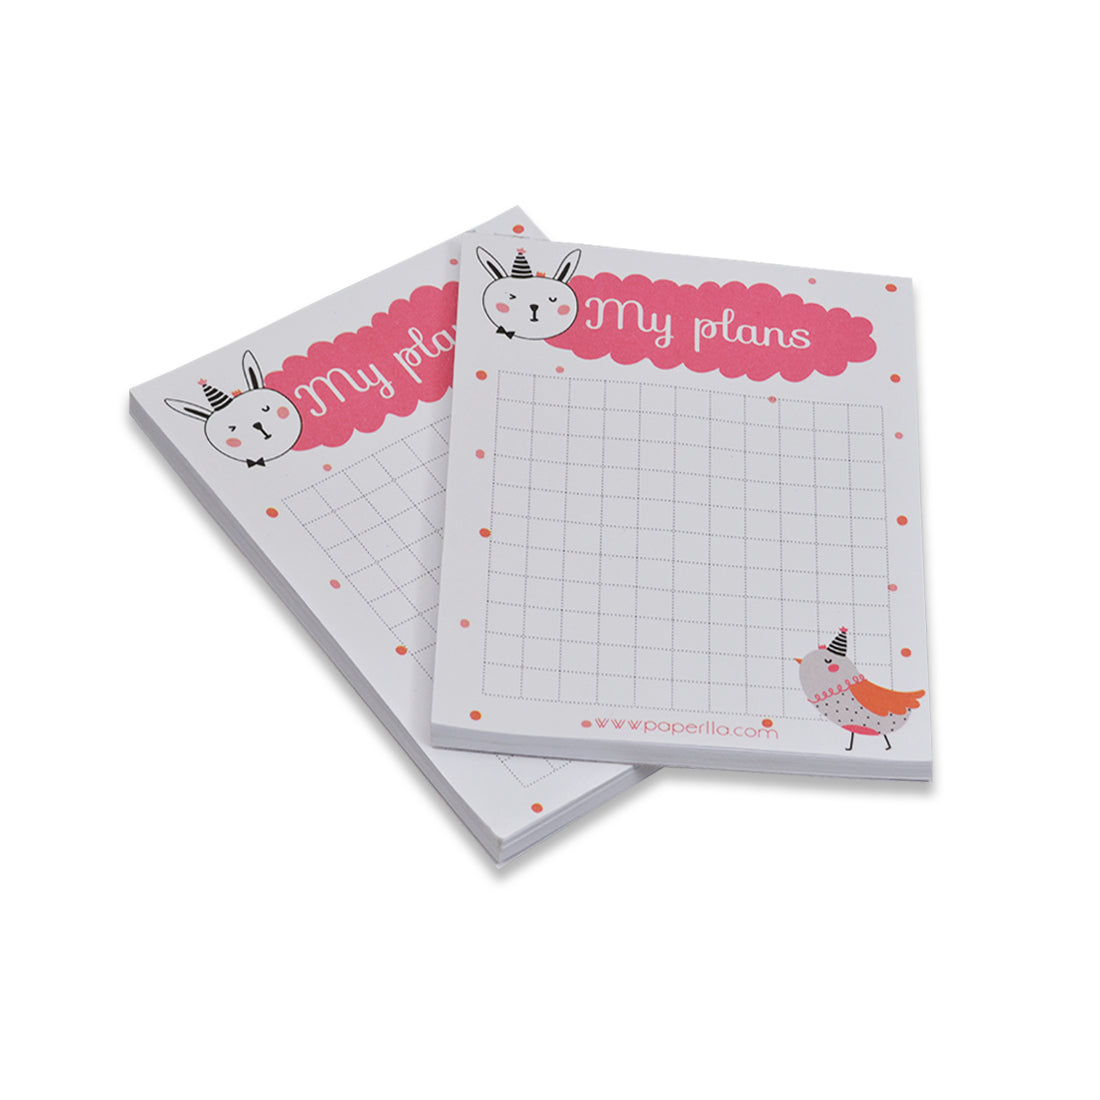 199 Store: Daily Planner, Things To Do List Notepad